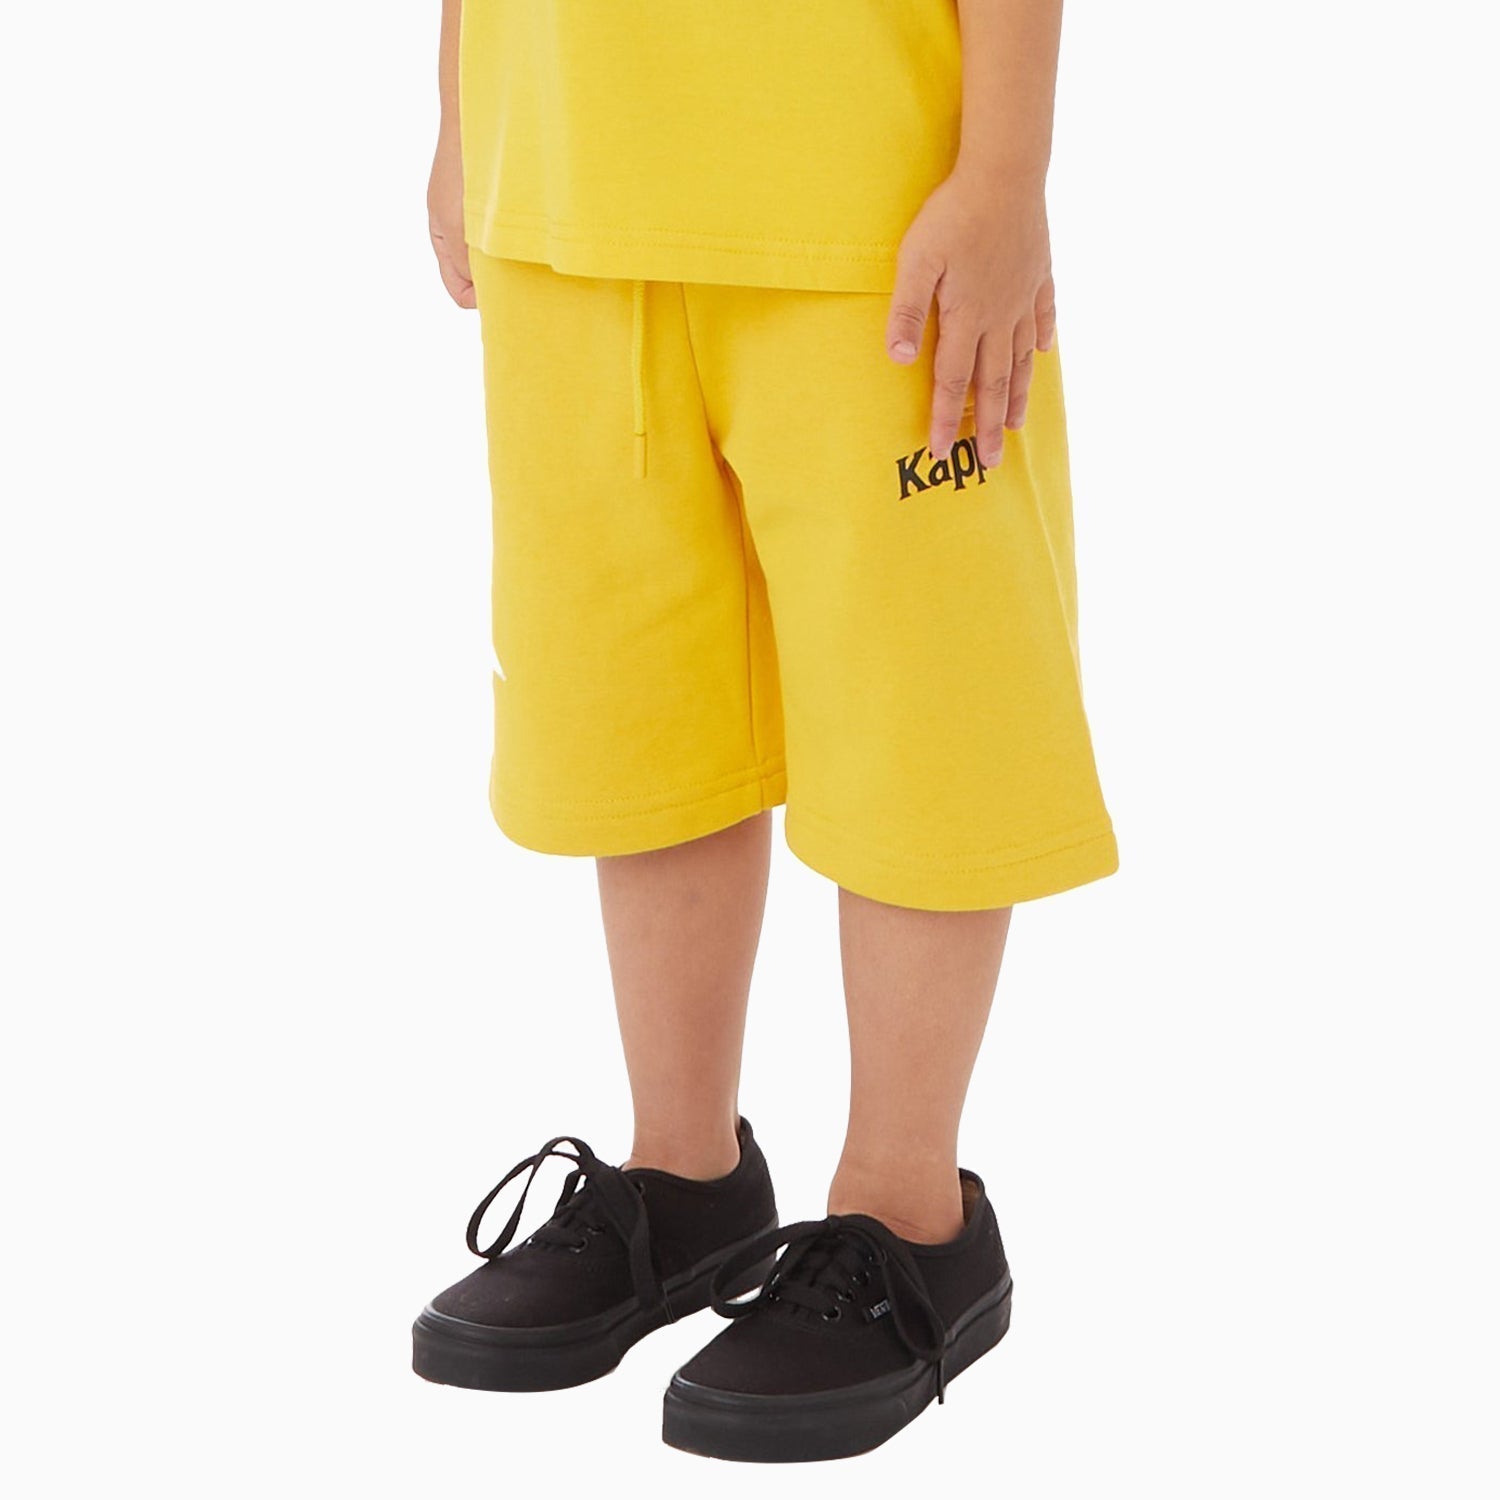 Kappa Kid's Authentic Estessi Outfit - Color: BLACK BLUE YELLOW, RED YELLOW BLUE WHITE, WHITE BLUE ASTER YELLOW, YELLOW VIOLET WHITE BLACK - Kids Premium Clothing -